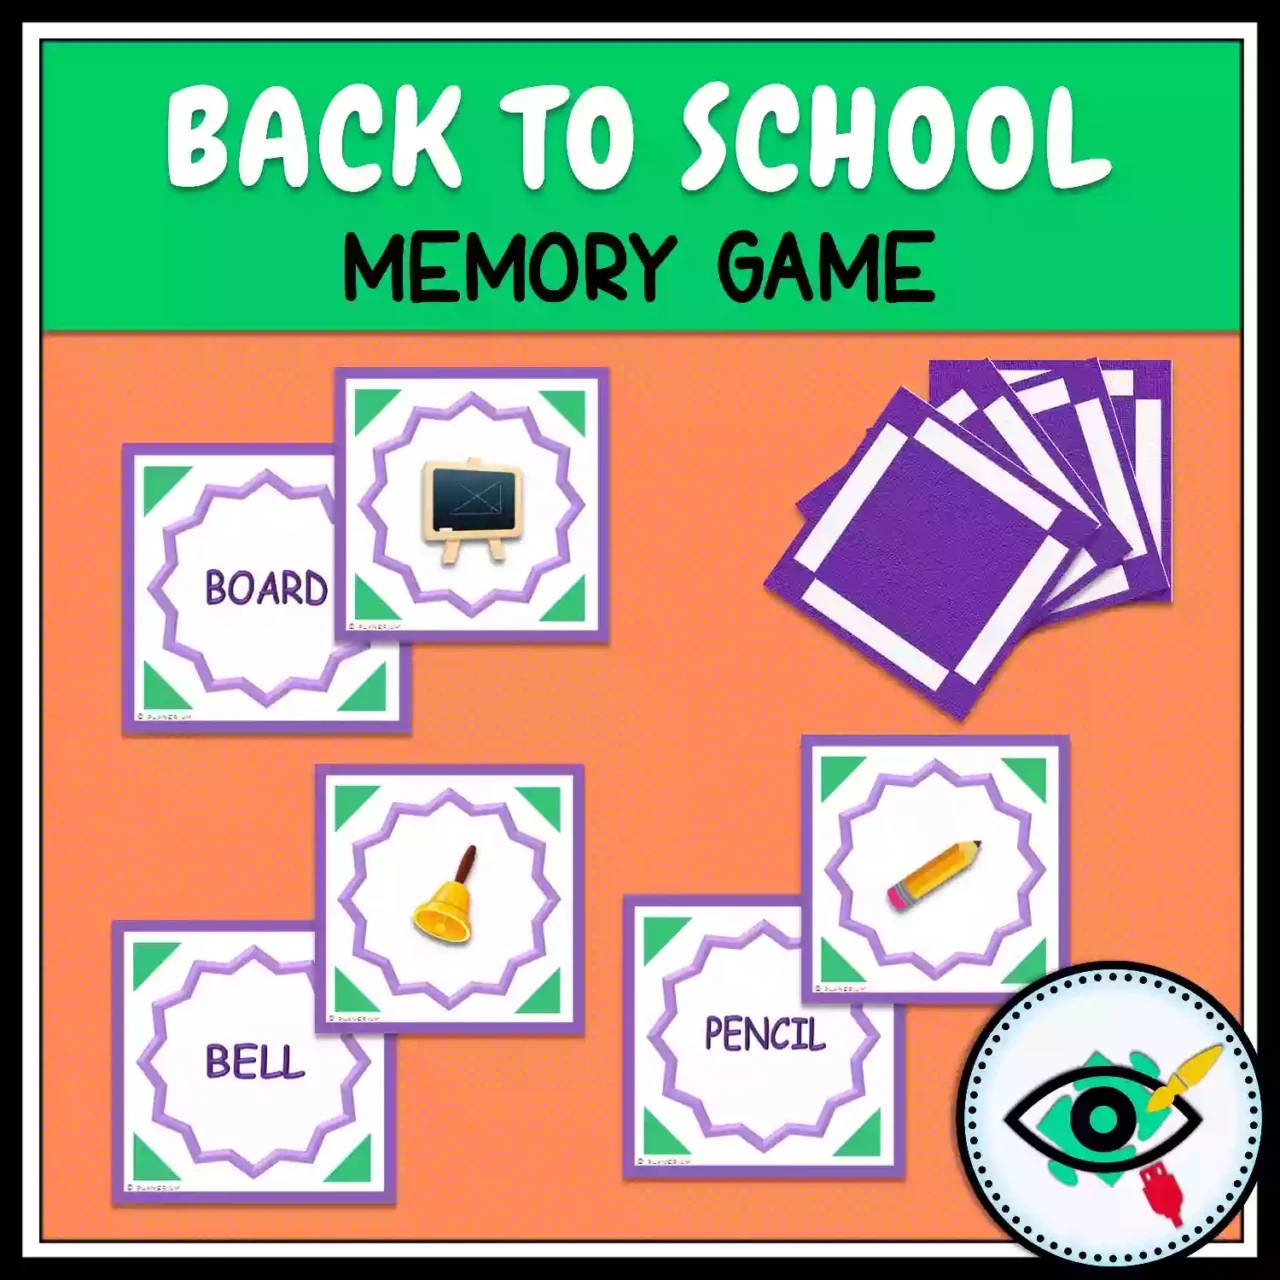 Back to School Memory Game - Featured 7